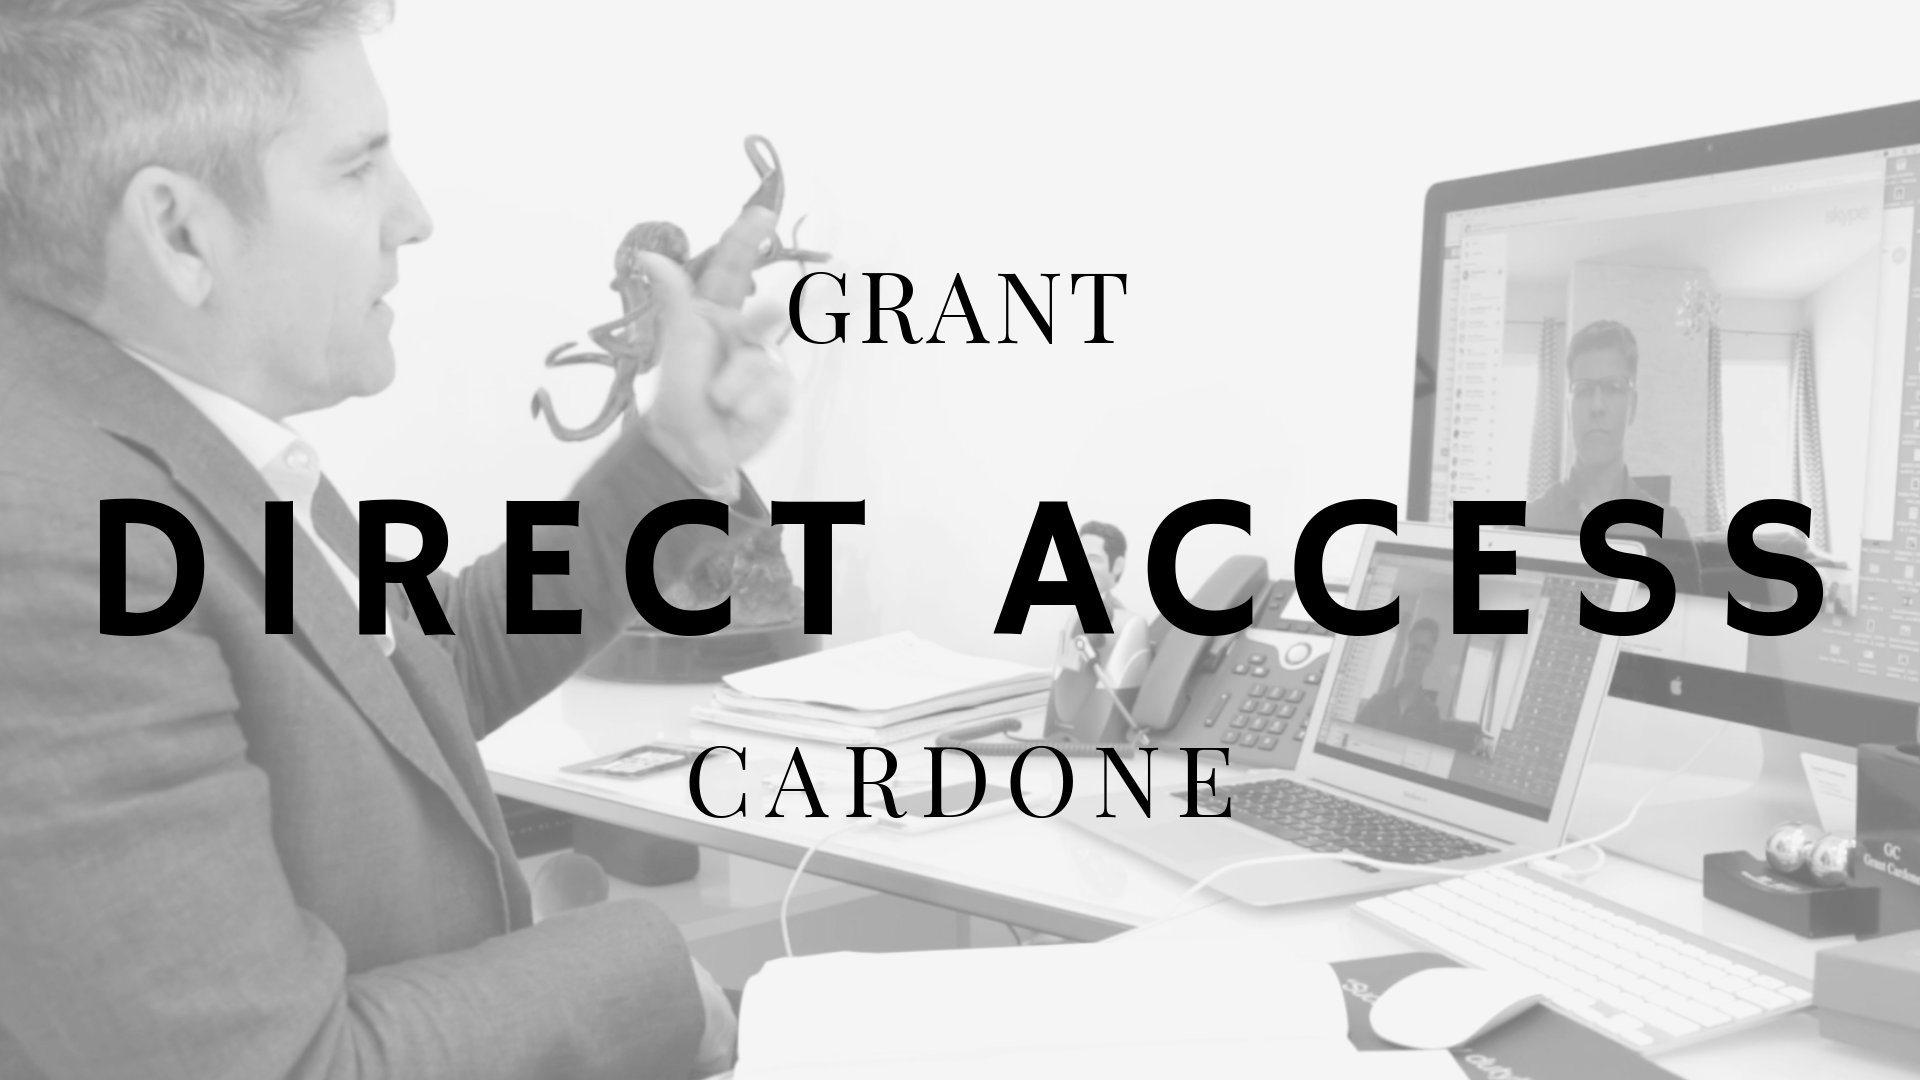 Direct Access to Grant Cardone